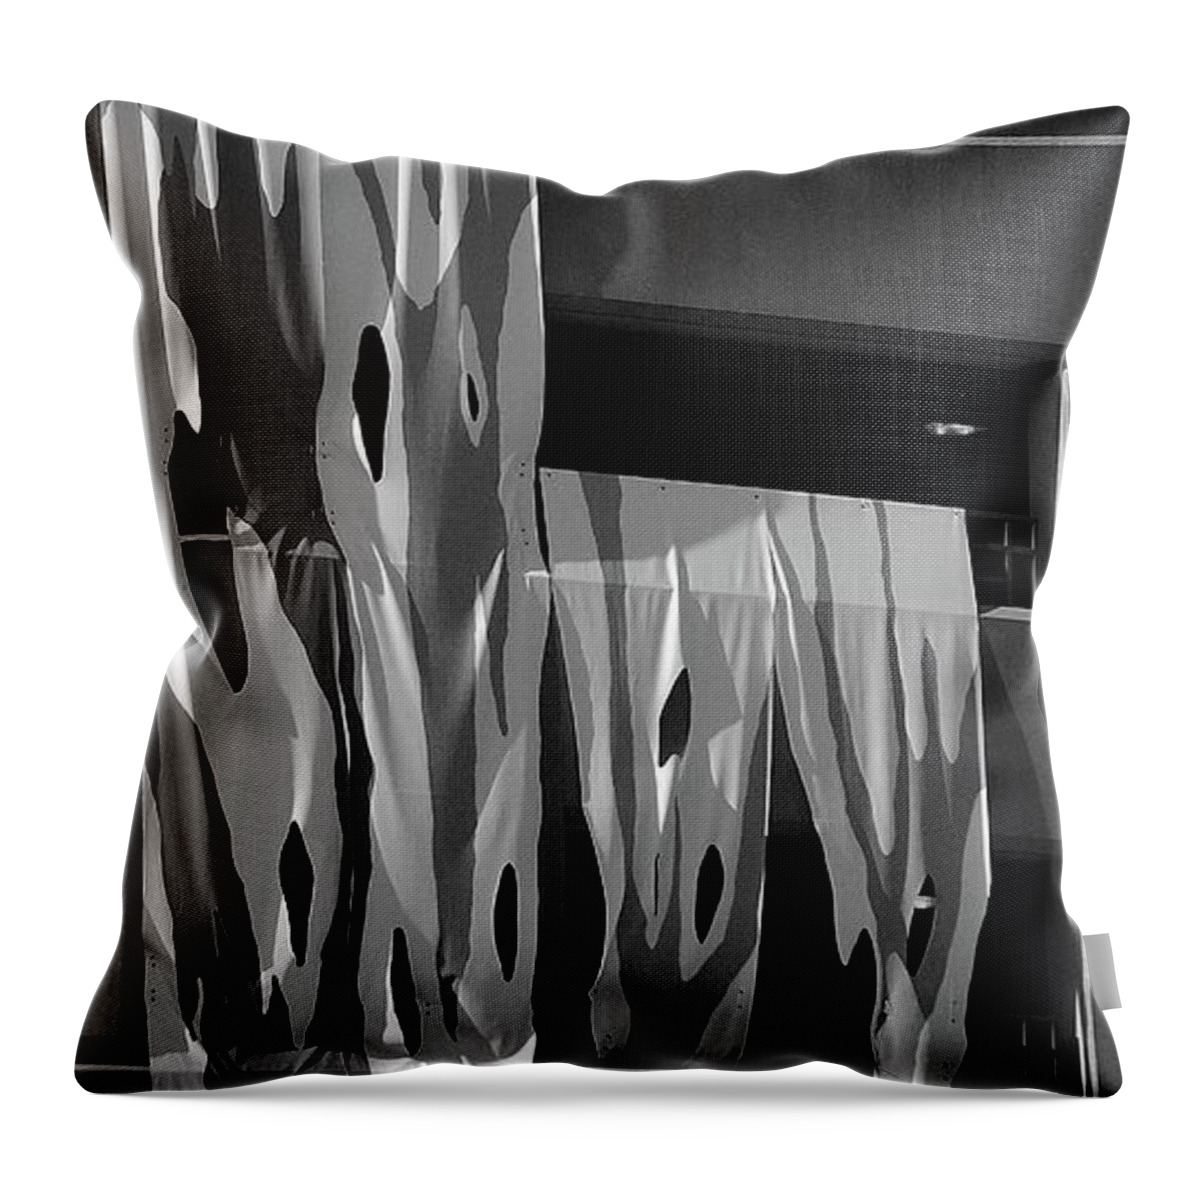 Draped Throw Pillow featuring the photograph Draped Building by Glory Ann Penington